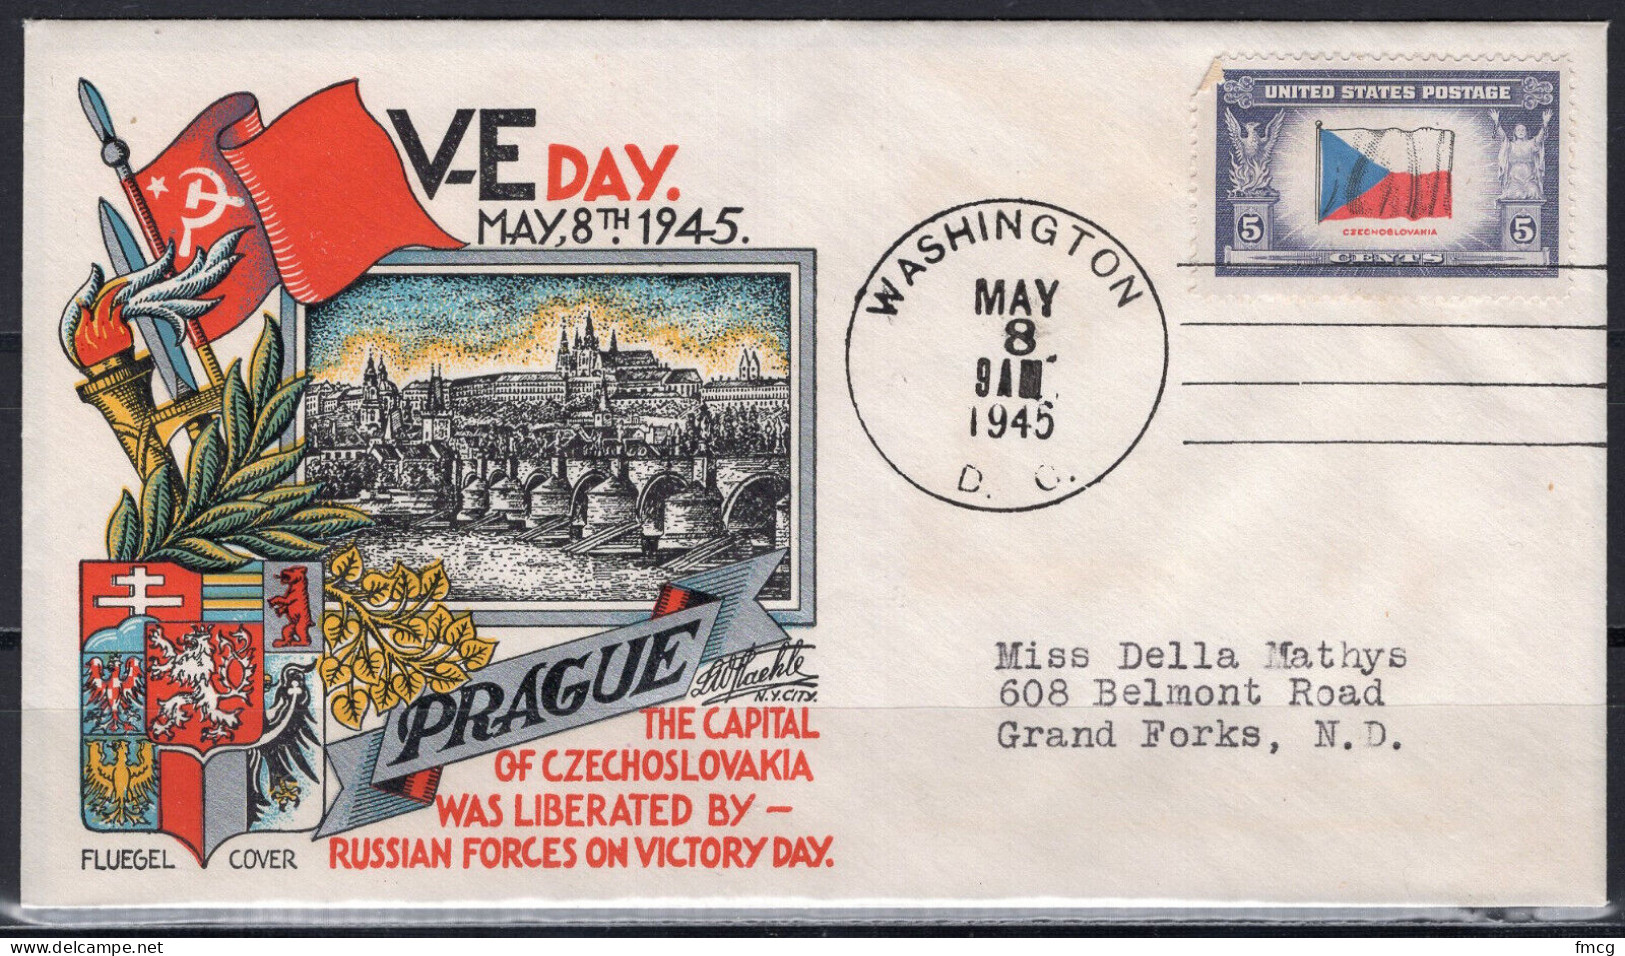 1945 Staehle Cover - World War II, VE Day, Prague Liberated, Washington, May 8 - Covers & Documents